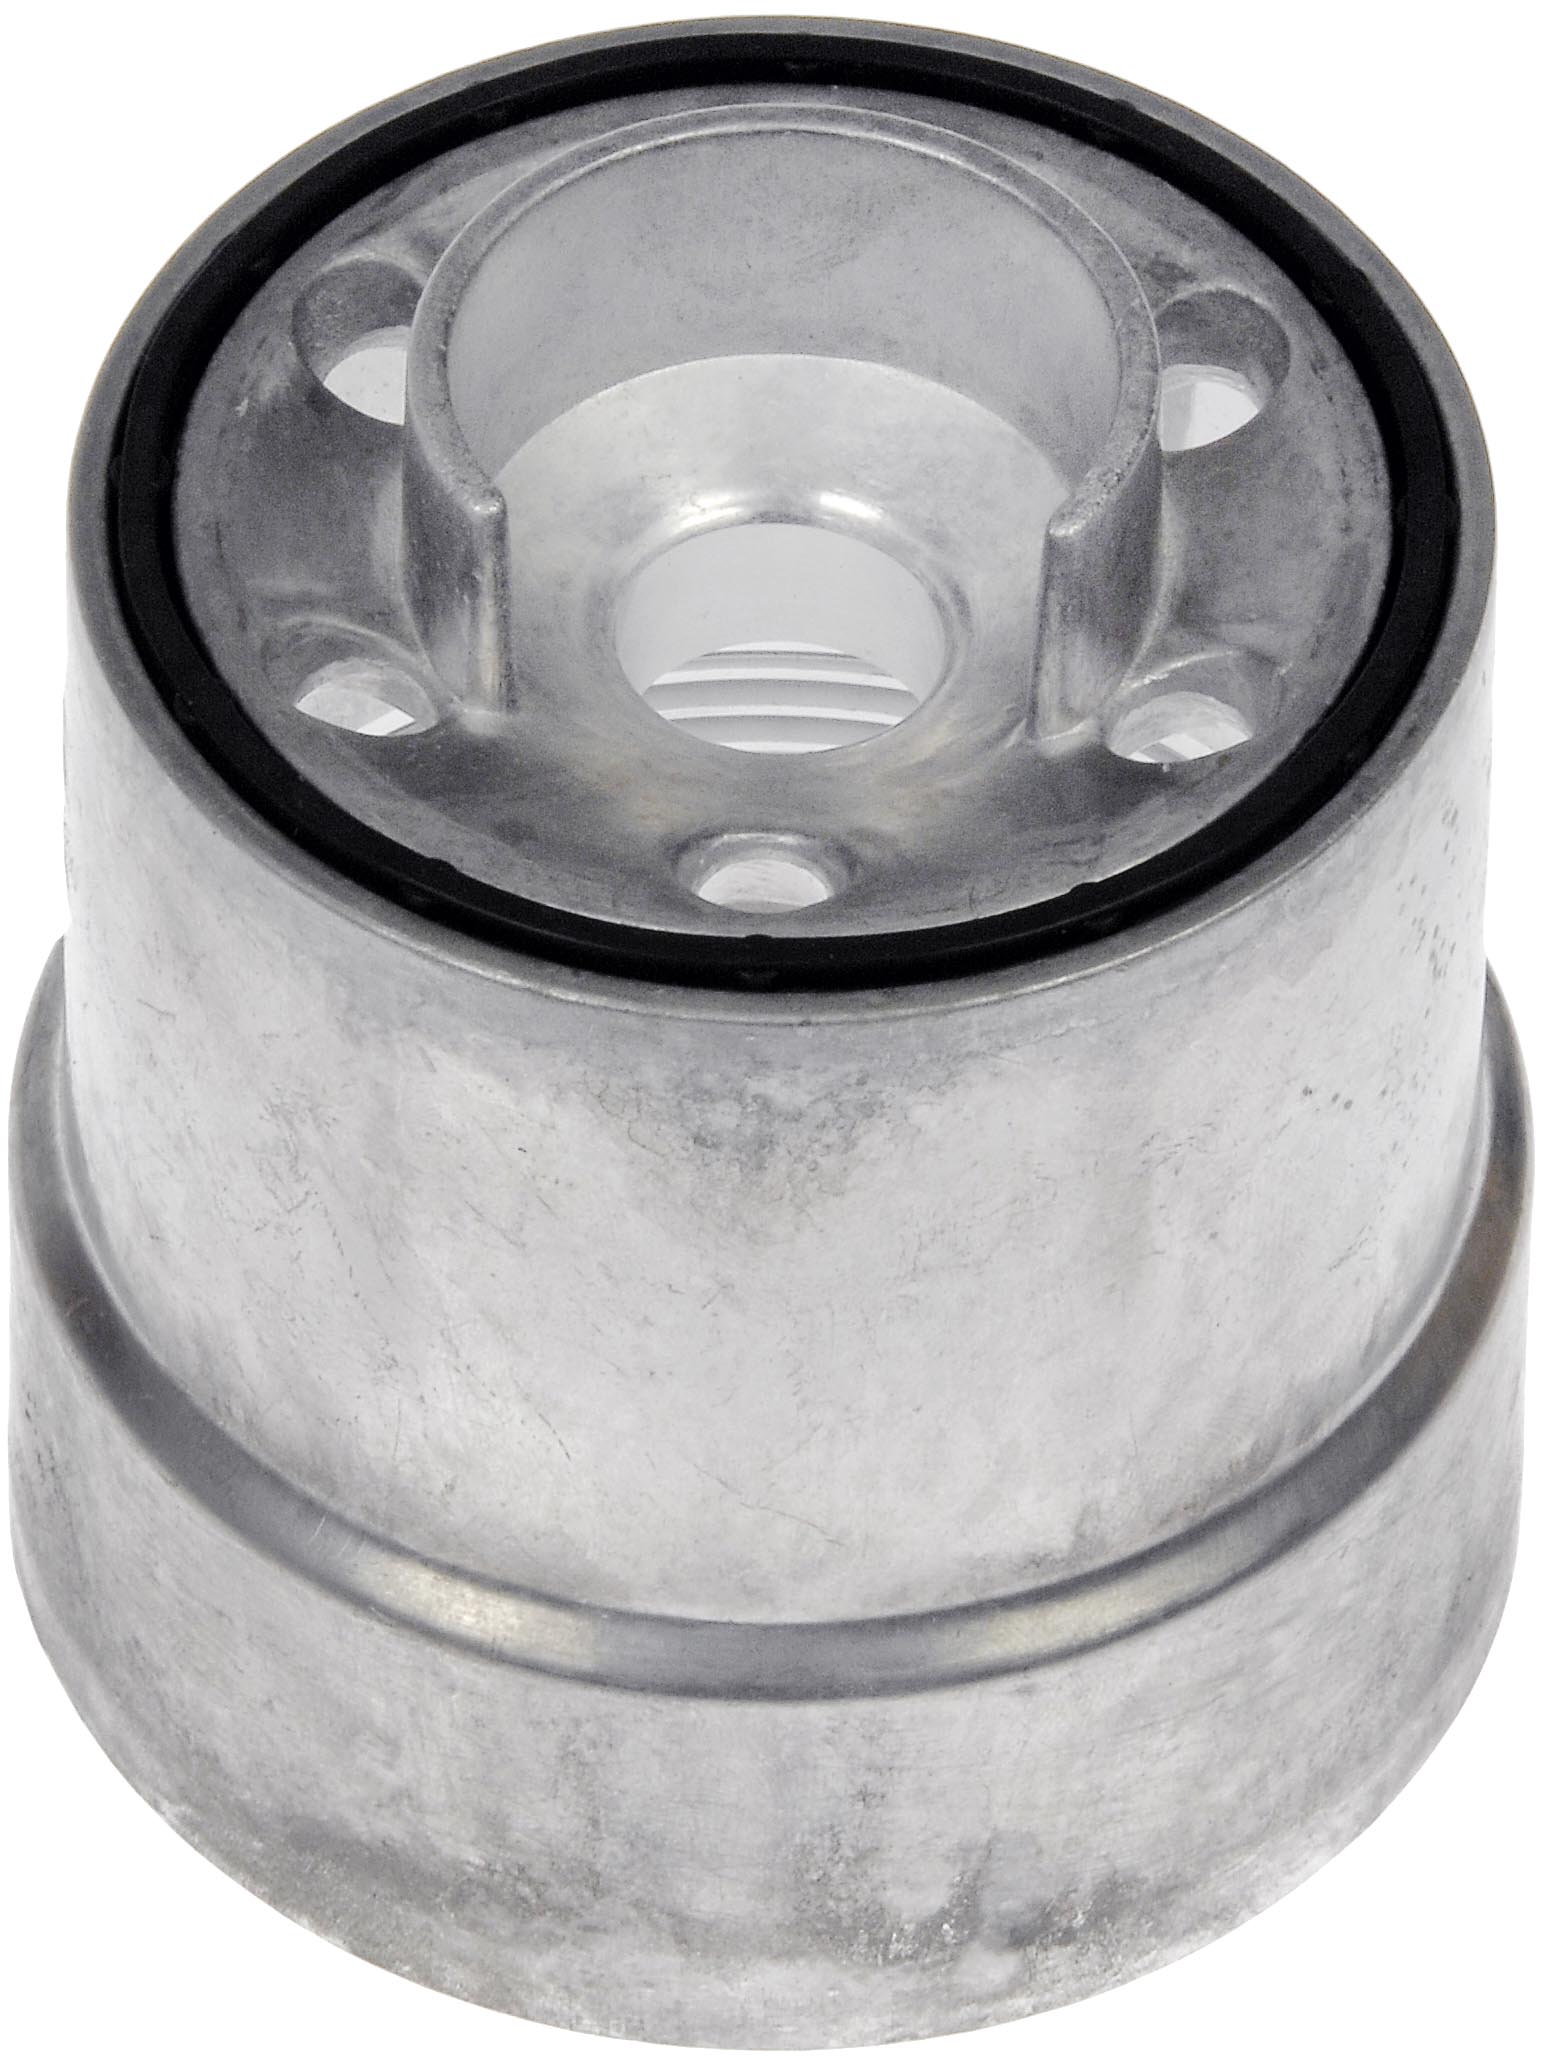 Dorman 917-047 Engine Oil Filter Housing for Specific Cadillac / Saturn Models Fits select: 2001-2003 SATURN L200, 2002-2003 SATURN VUE - image 1 of 2